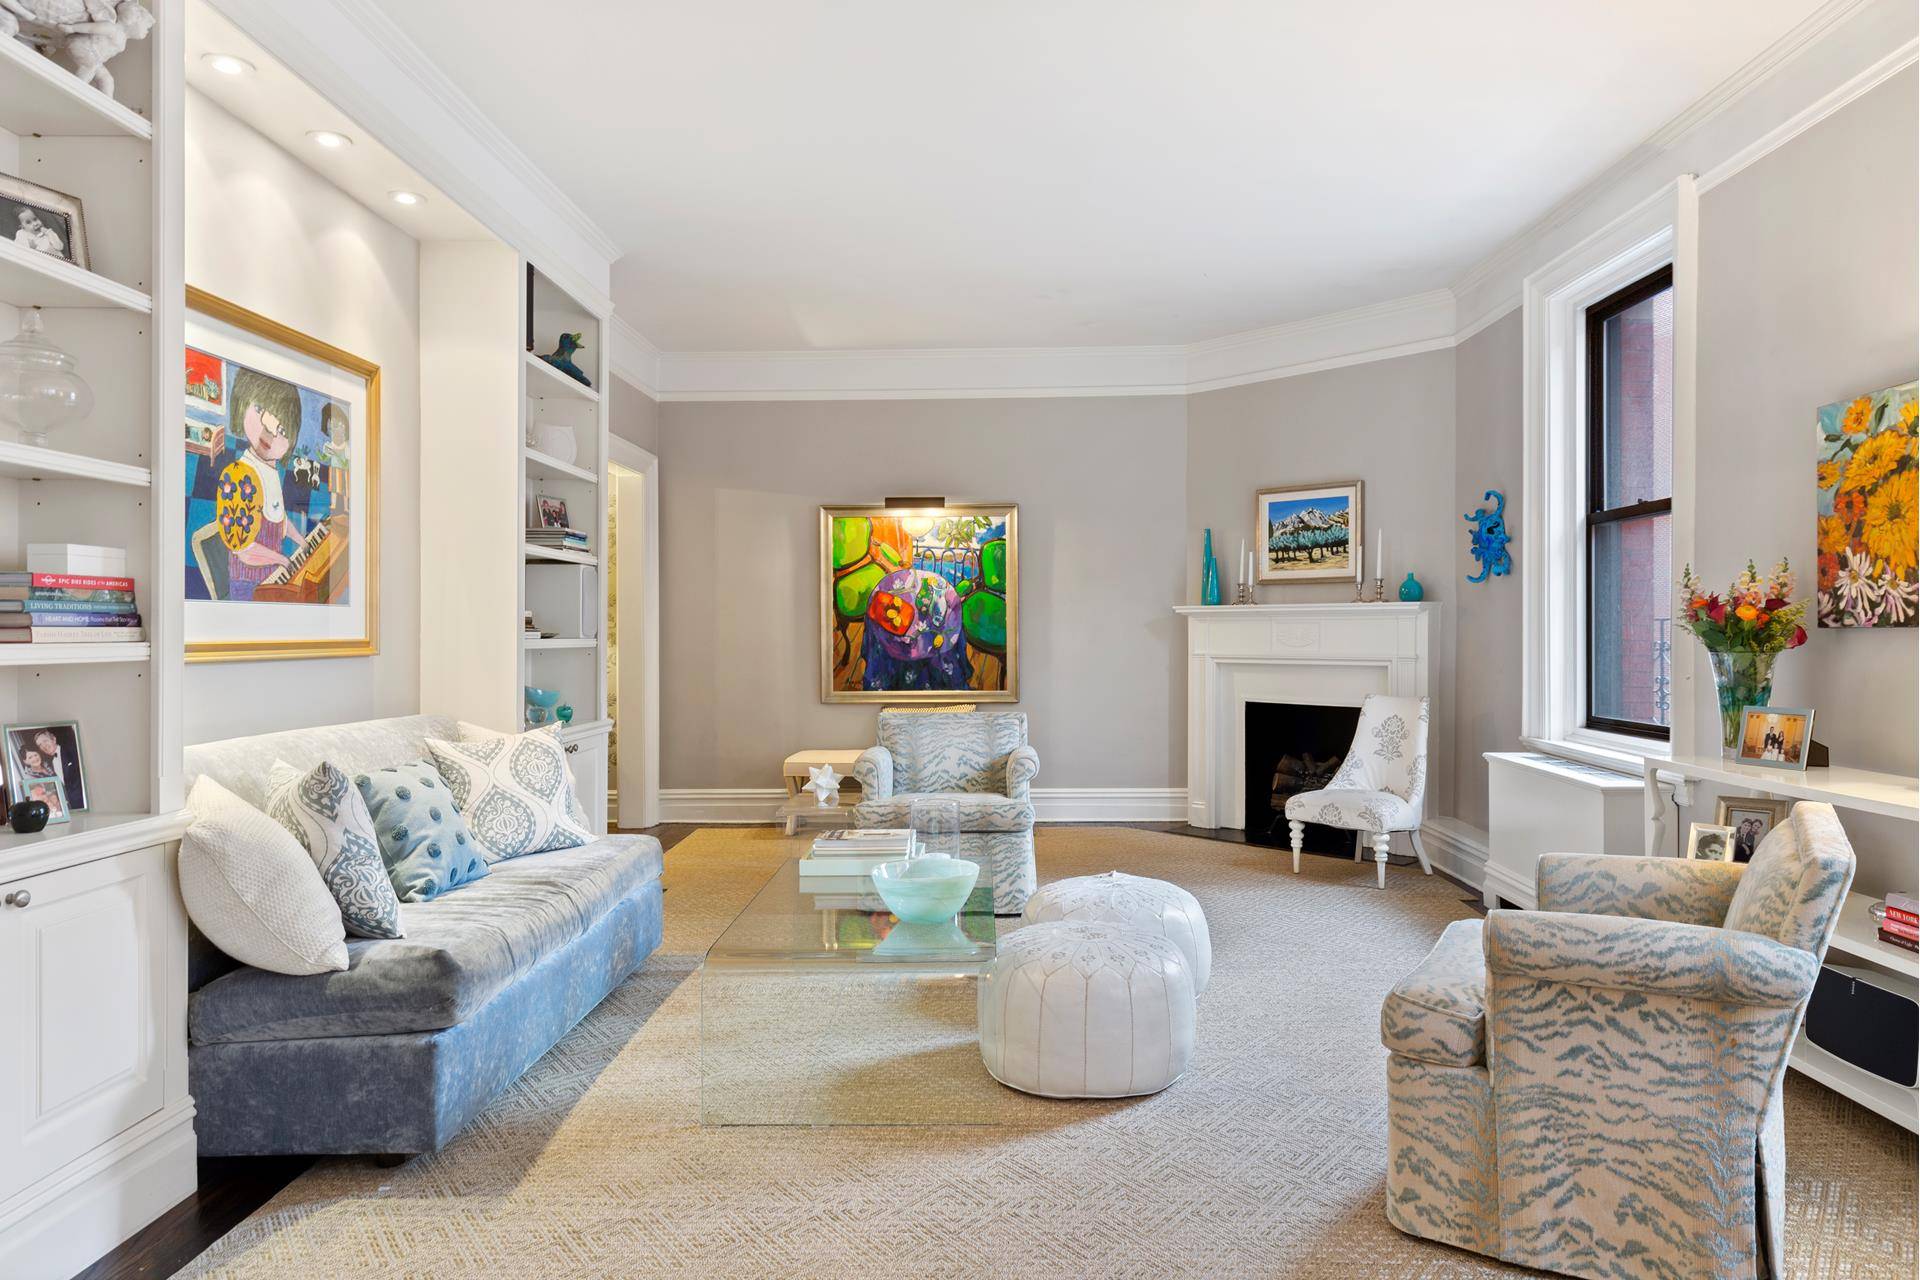 Step into classic Carnegie Hill with location, light and space in this elegant seven room home in a prewar doorman building on the Upper East Side of Manhattan.